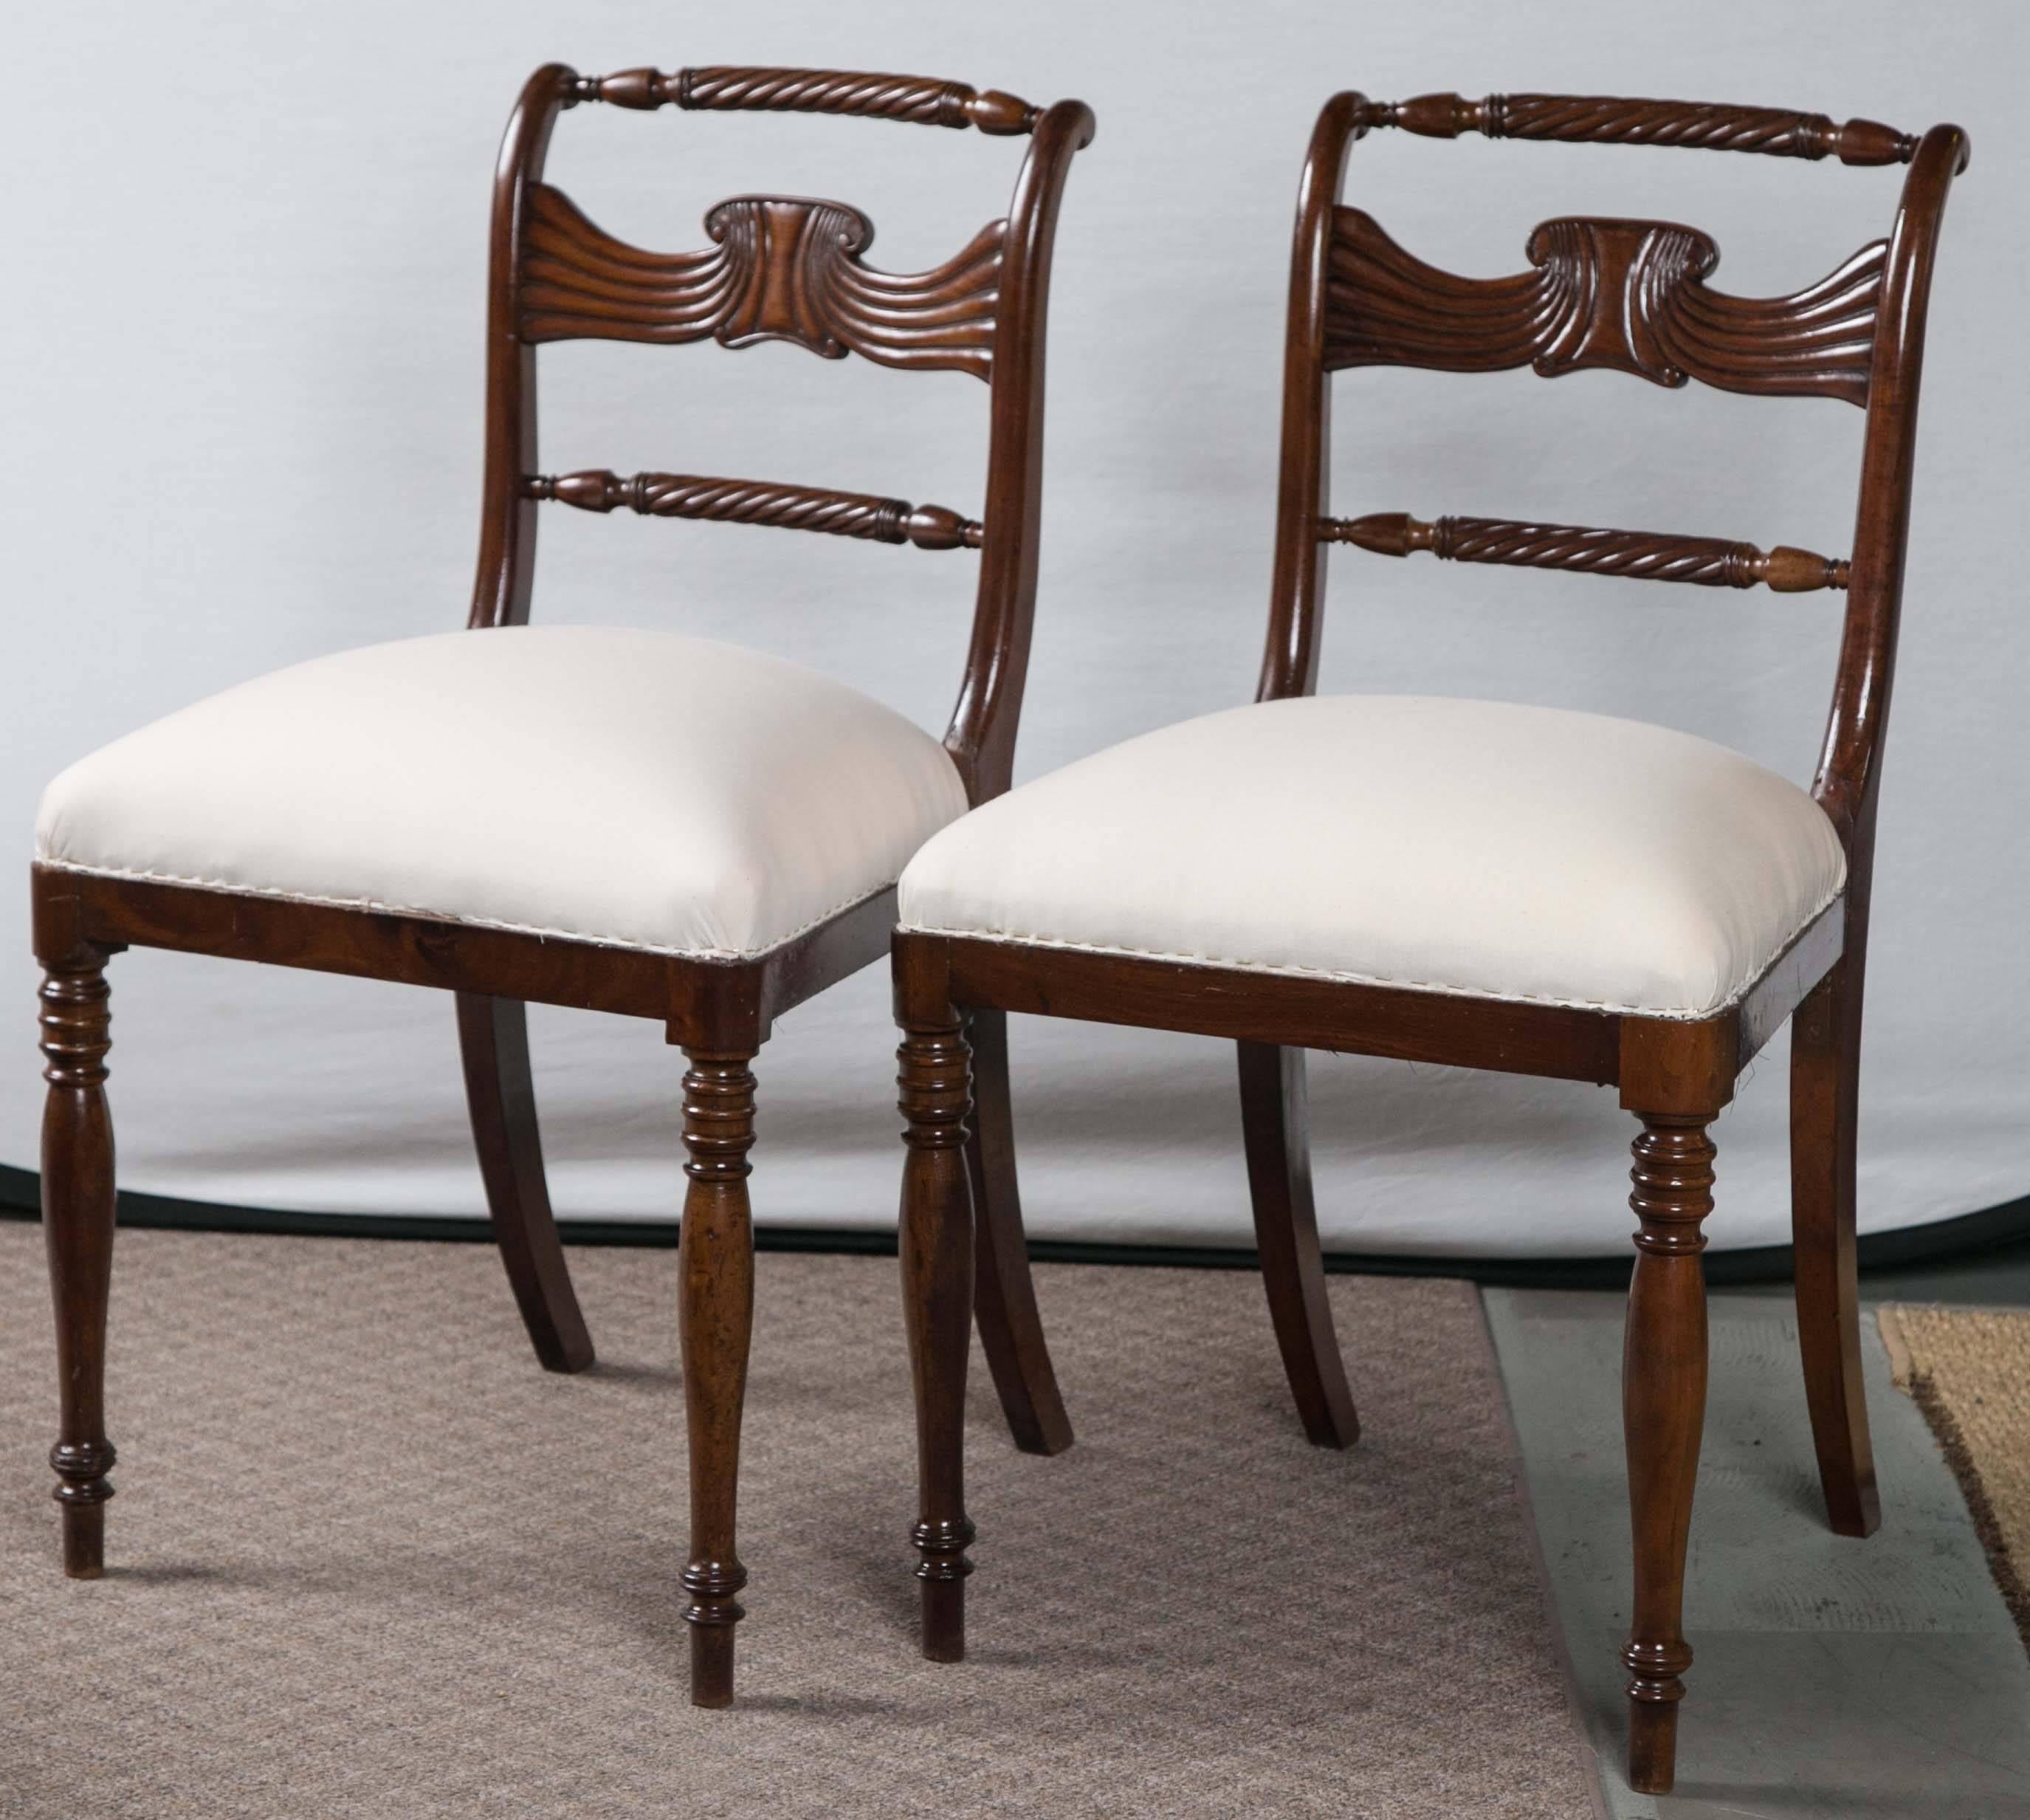 Beautifully carved and finished set of six 19th century Federal dining chairs recently covered in muslin.